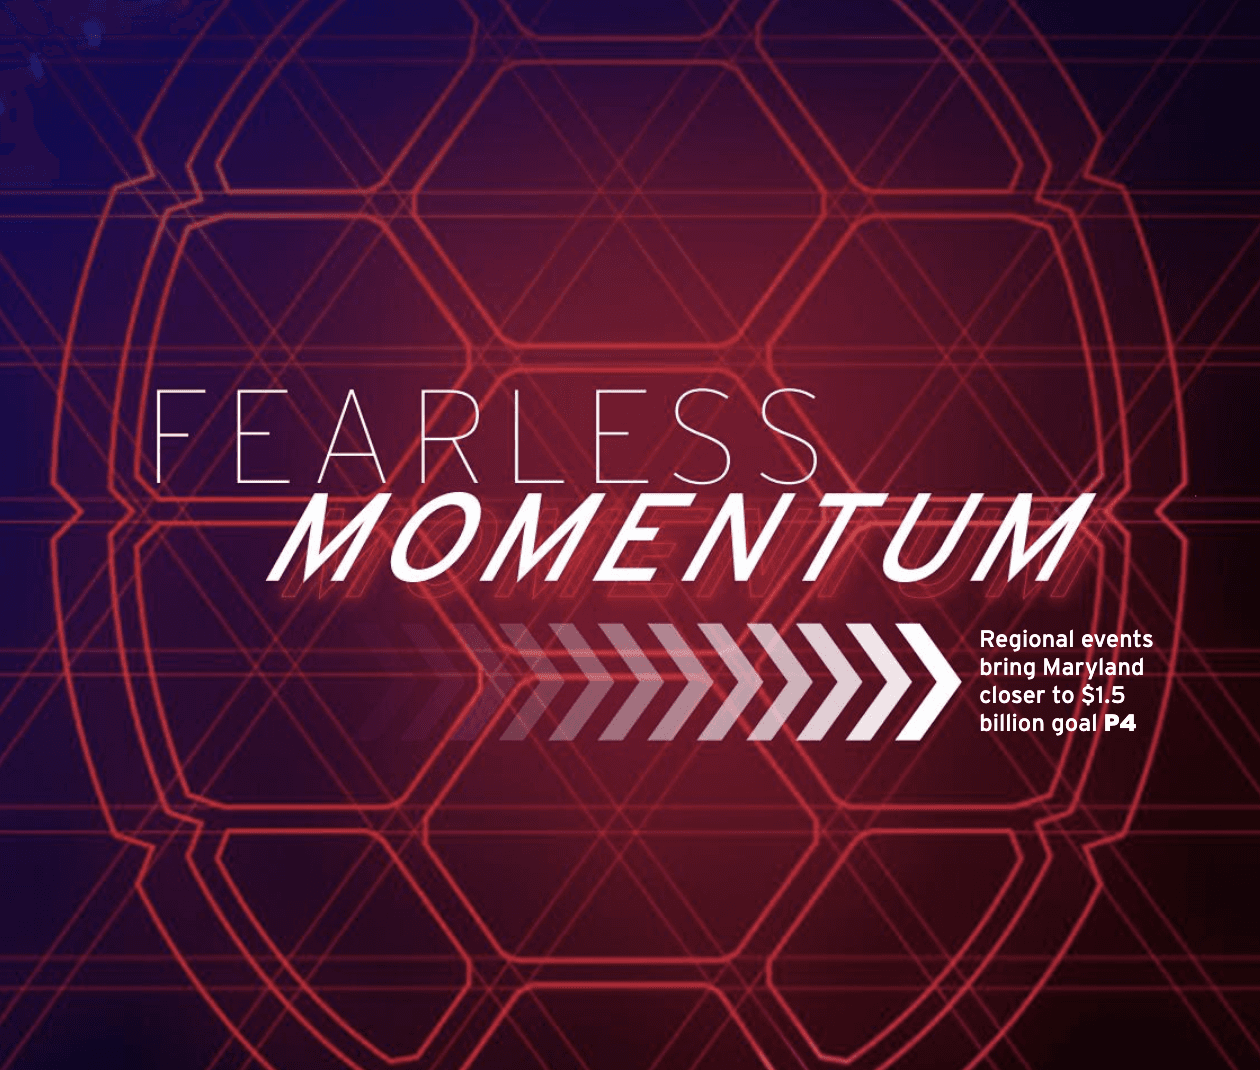 Cover of the Giving Newsletter March 2020 edition, with a red turtle shell and white heading that says 'Fearless Momentum Regional events bring Maryland closer to $1.5 billion goal P4'